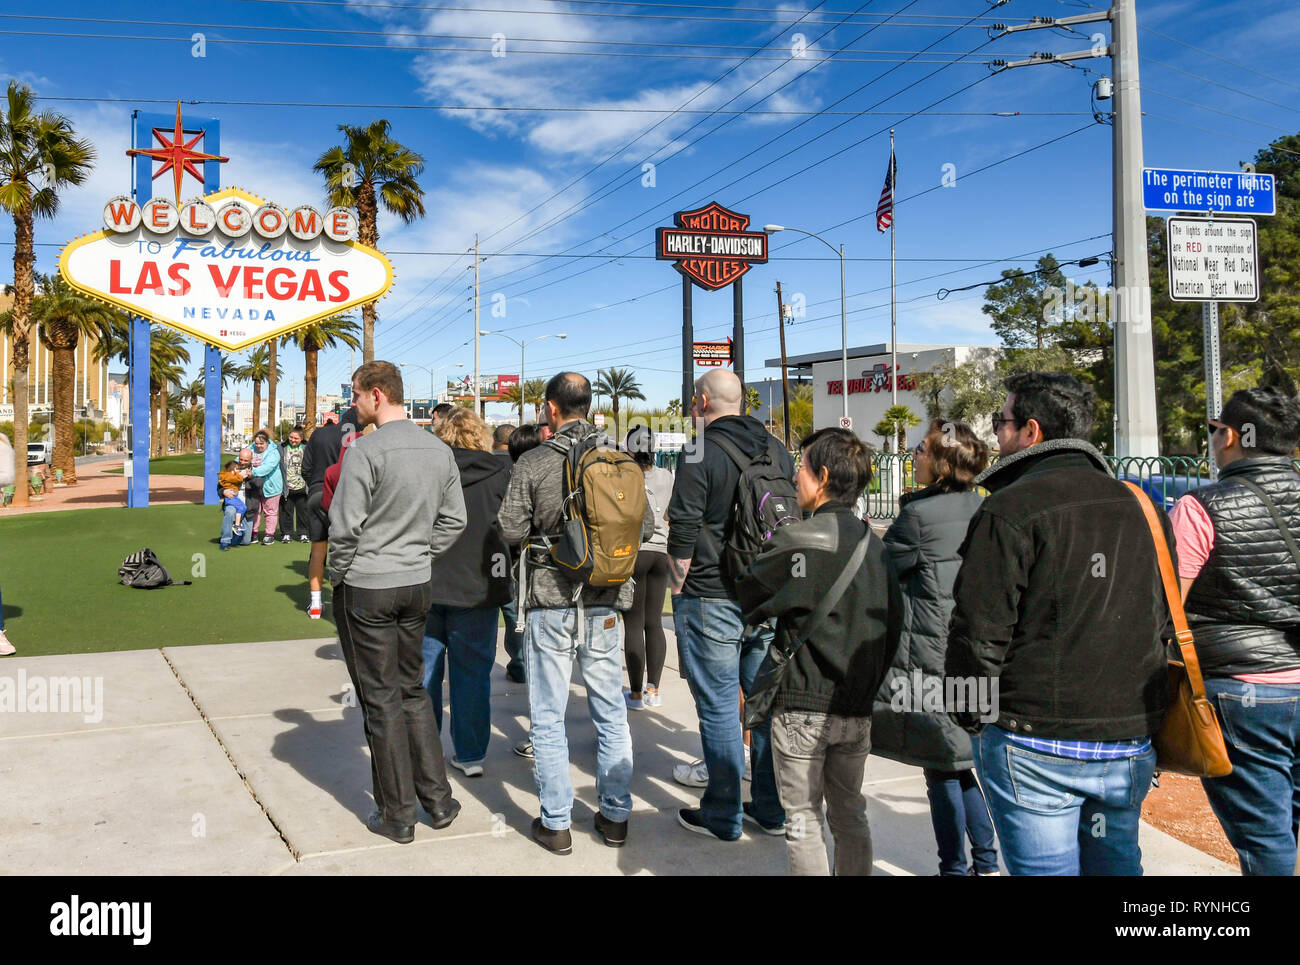 LAS VEGAS, NV, USA - FEBRUARY 2019: People queuing to have their picture taken in front of the famous 'Welcome to Las Vegas' sign. Stock Photo